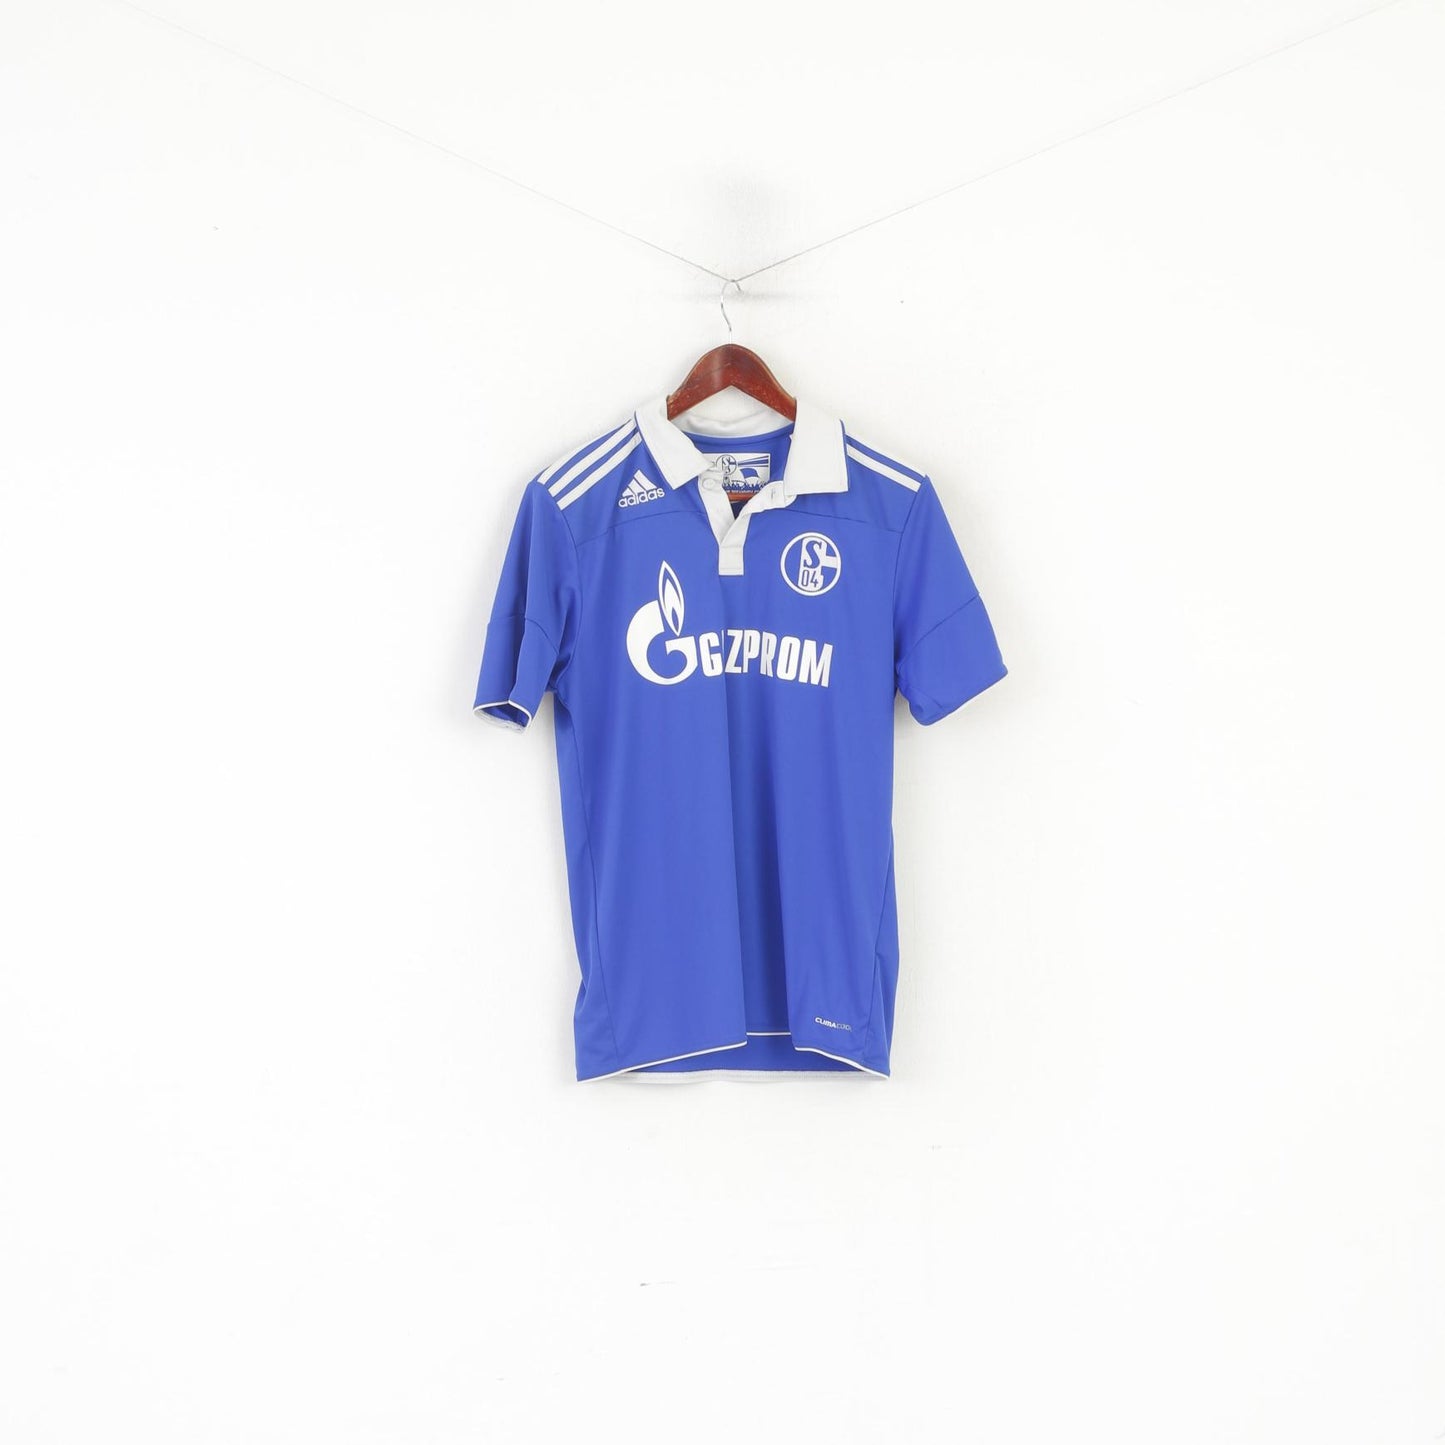 Adidas Schalke 04 Youth 170 15-16 Age Polo Shirt Blue Football Vintage Jersey Top